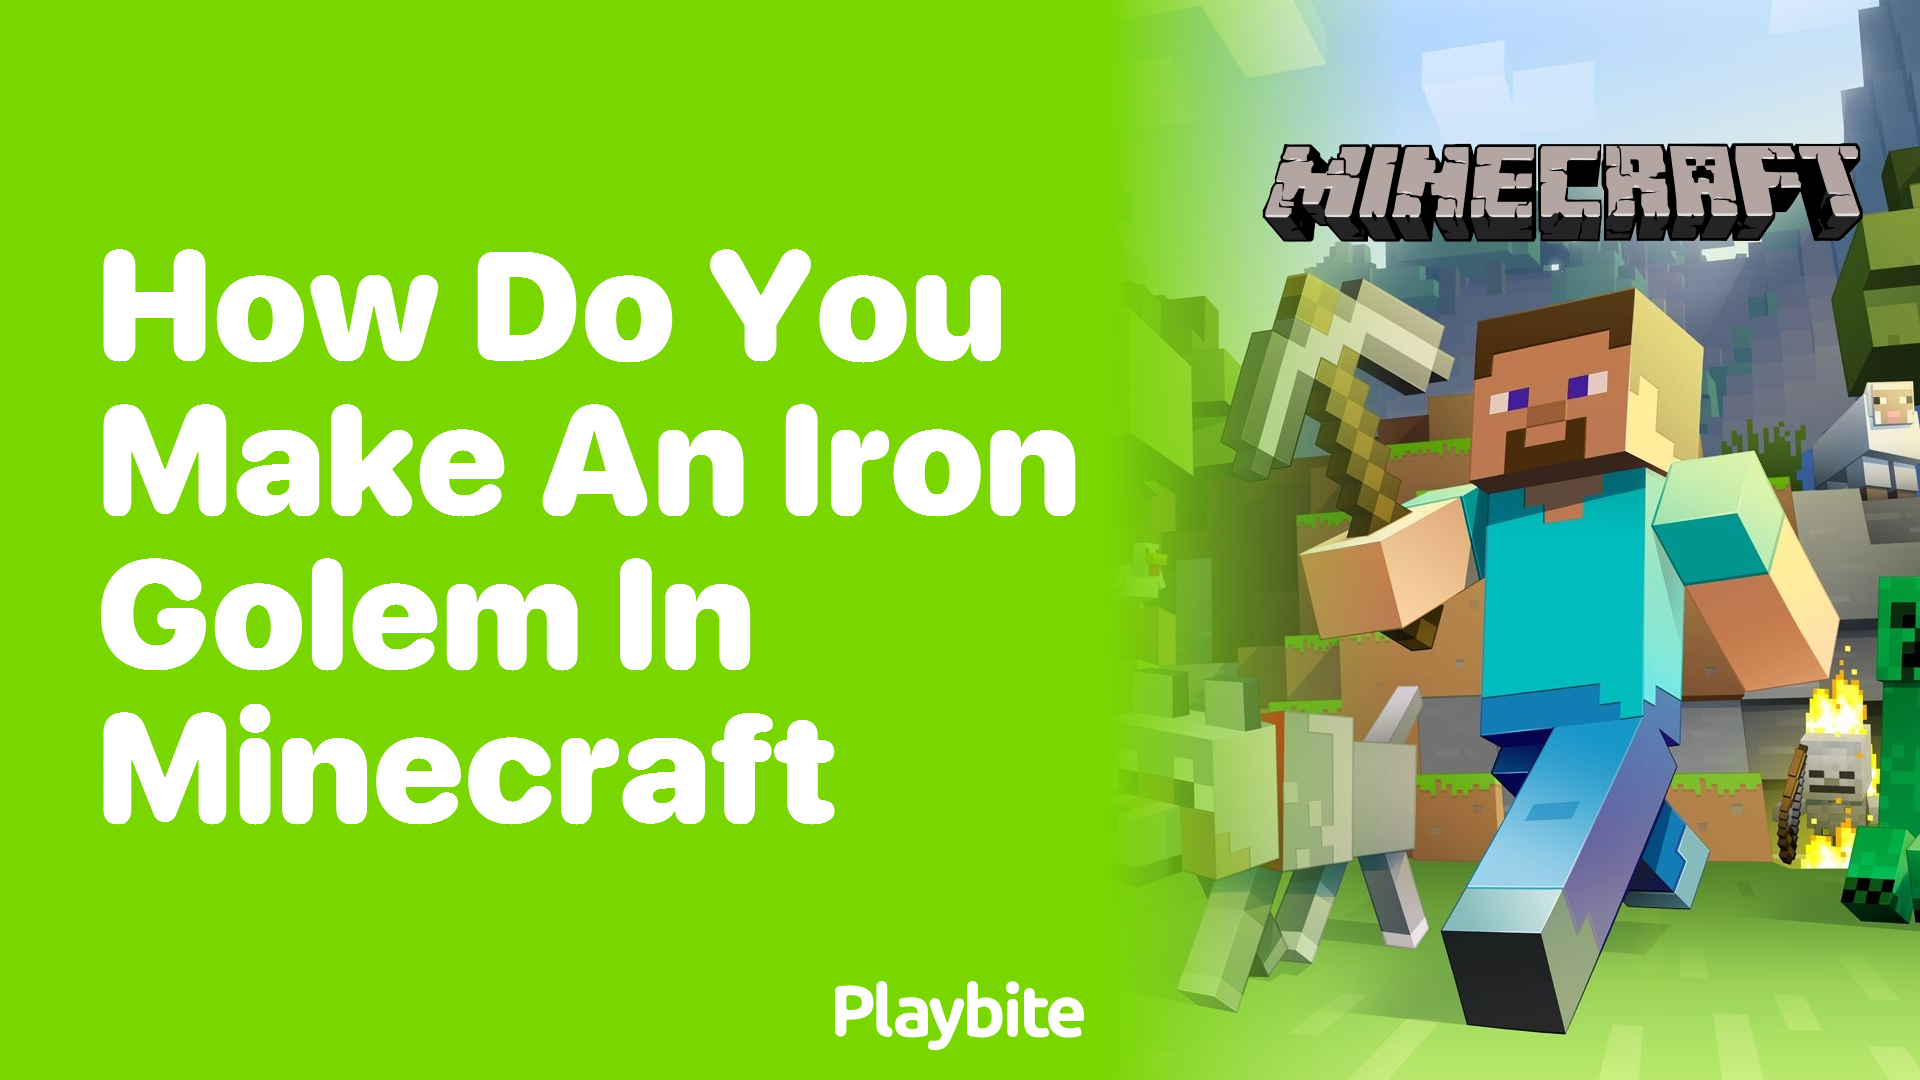 How Do You Make an Iron Golem in Minecraft?